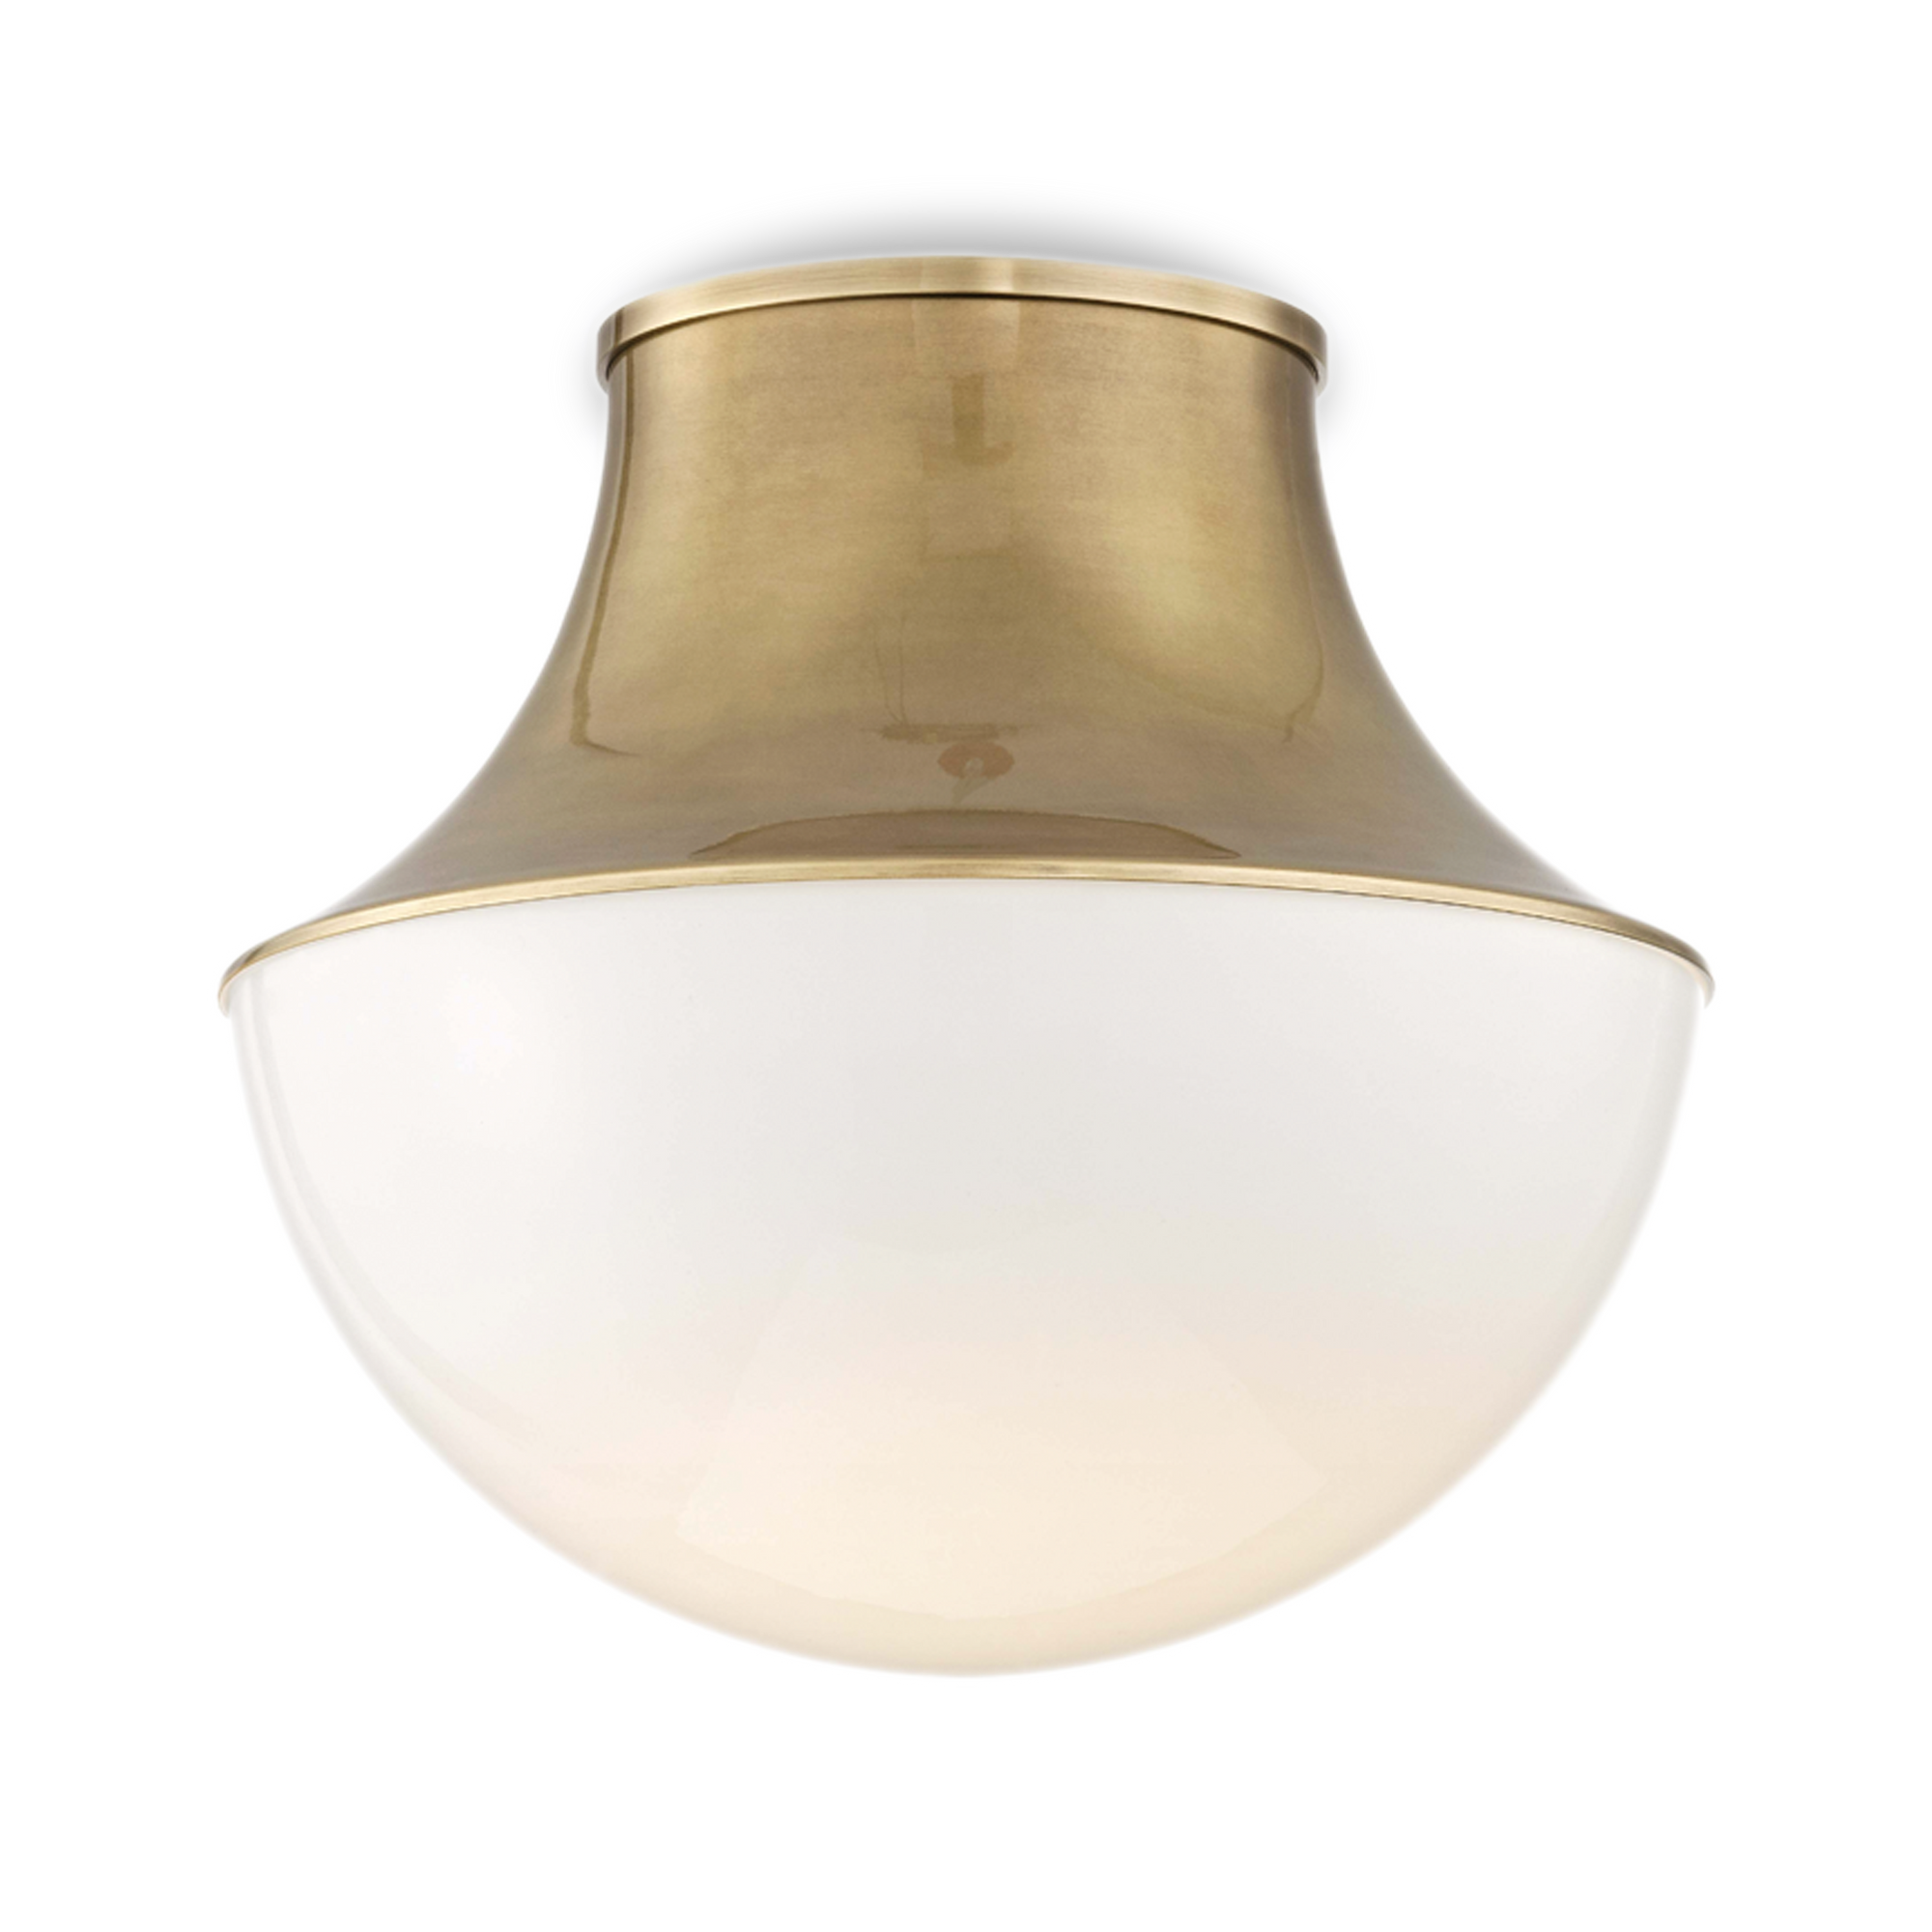 A demi-globe glass diffuser, clear on the inside, diffuses high-performance LED light from this flush mount.